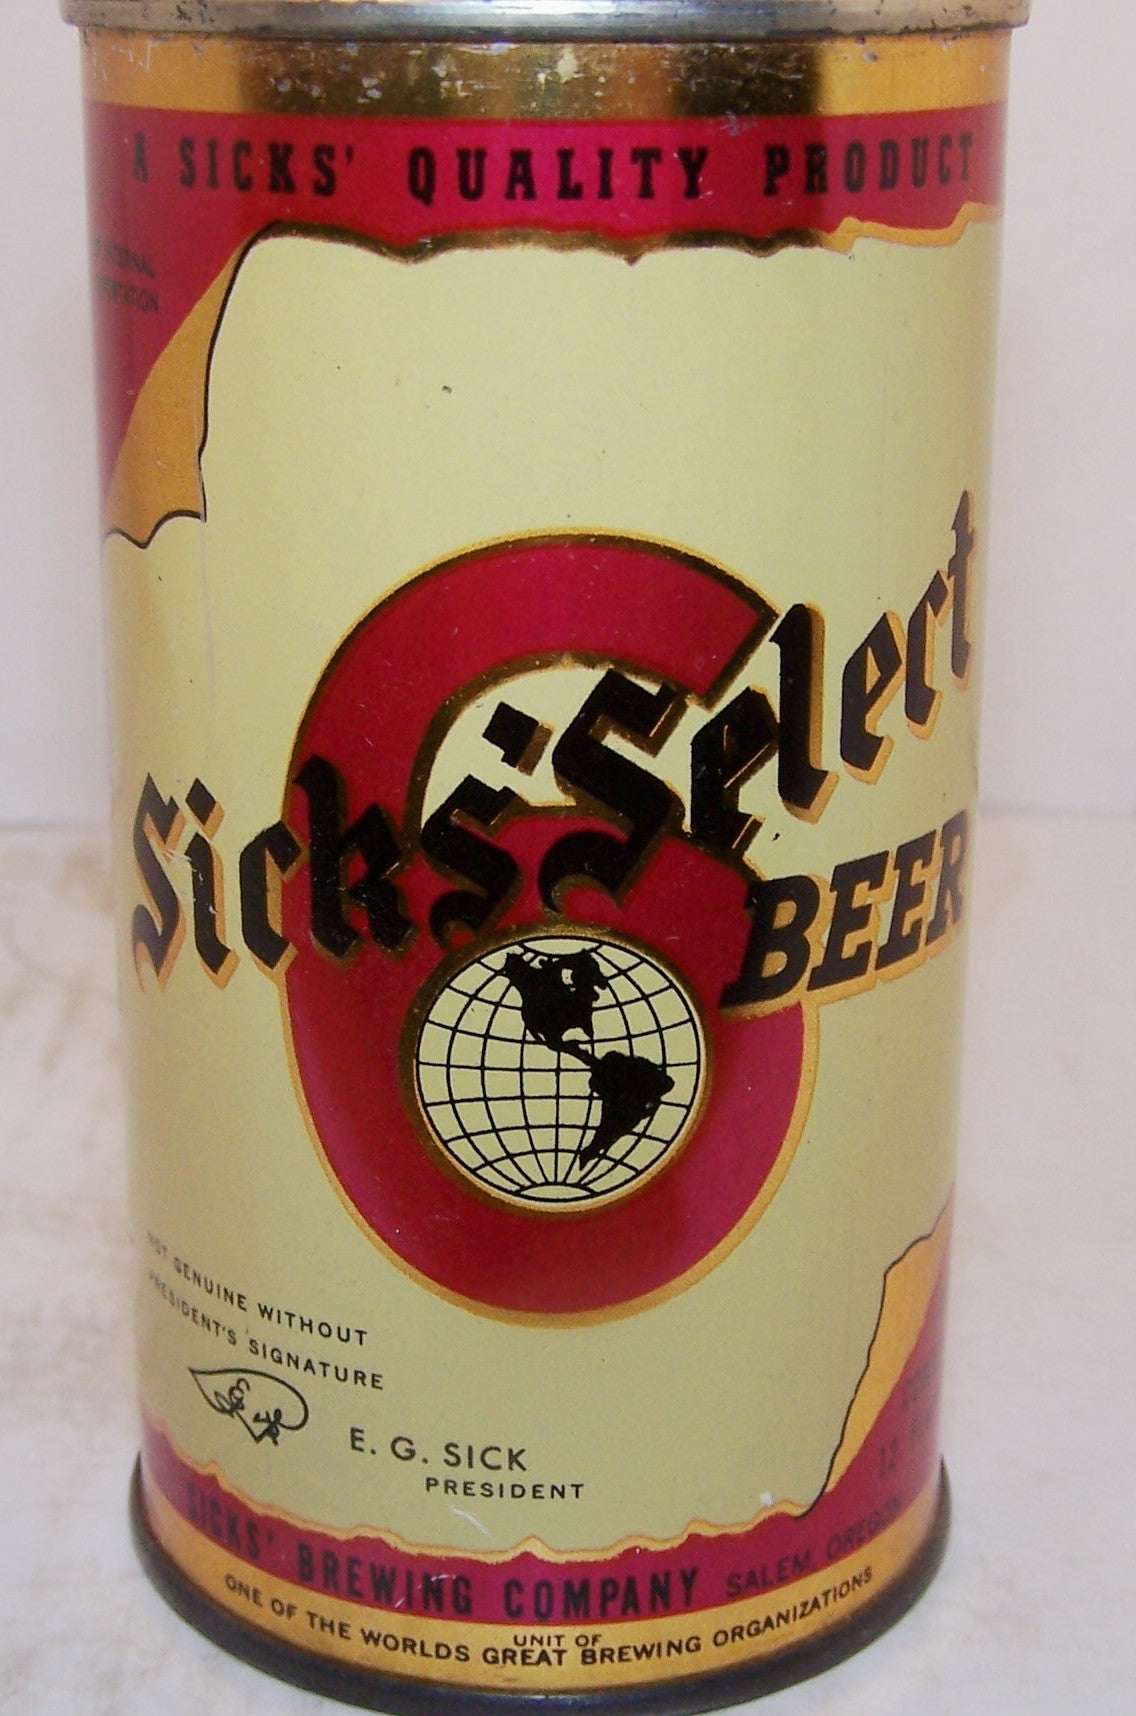 Sick's Select Beer, Withdrawn Free for export, Lilek page # 759 Grade 1/1+ Sold on 4/8/15